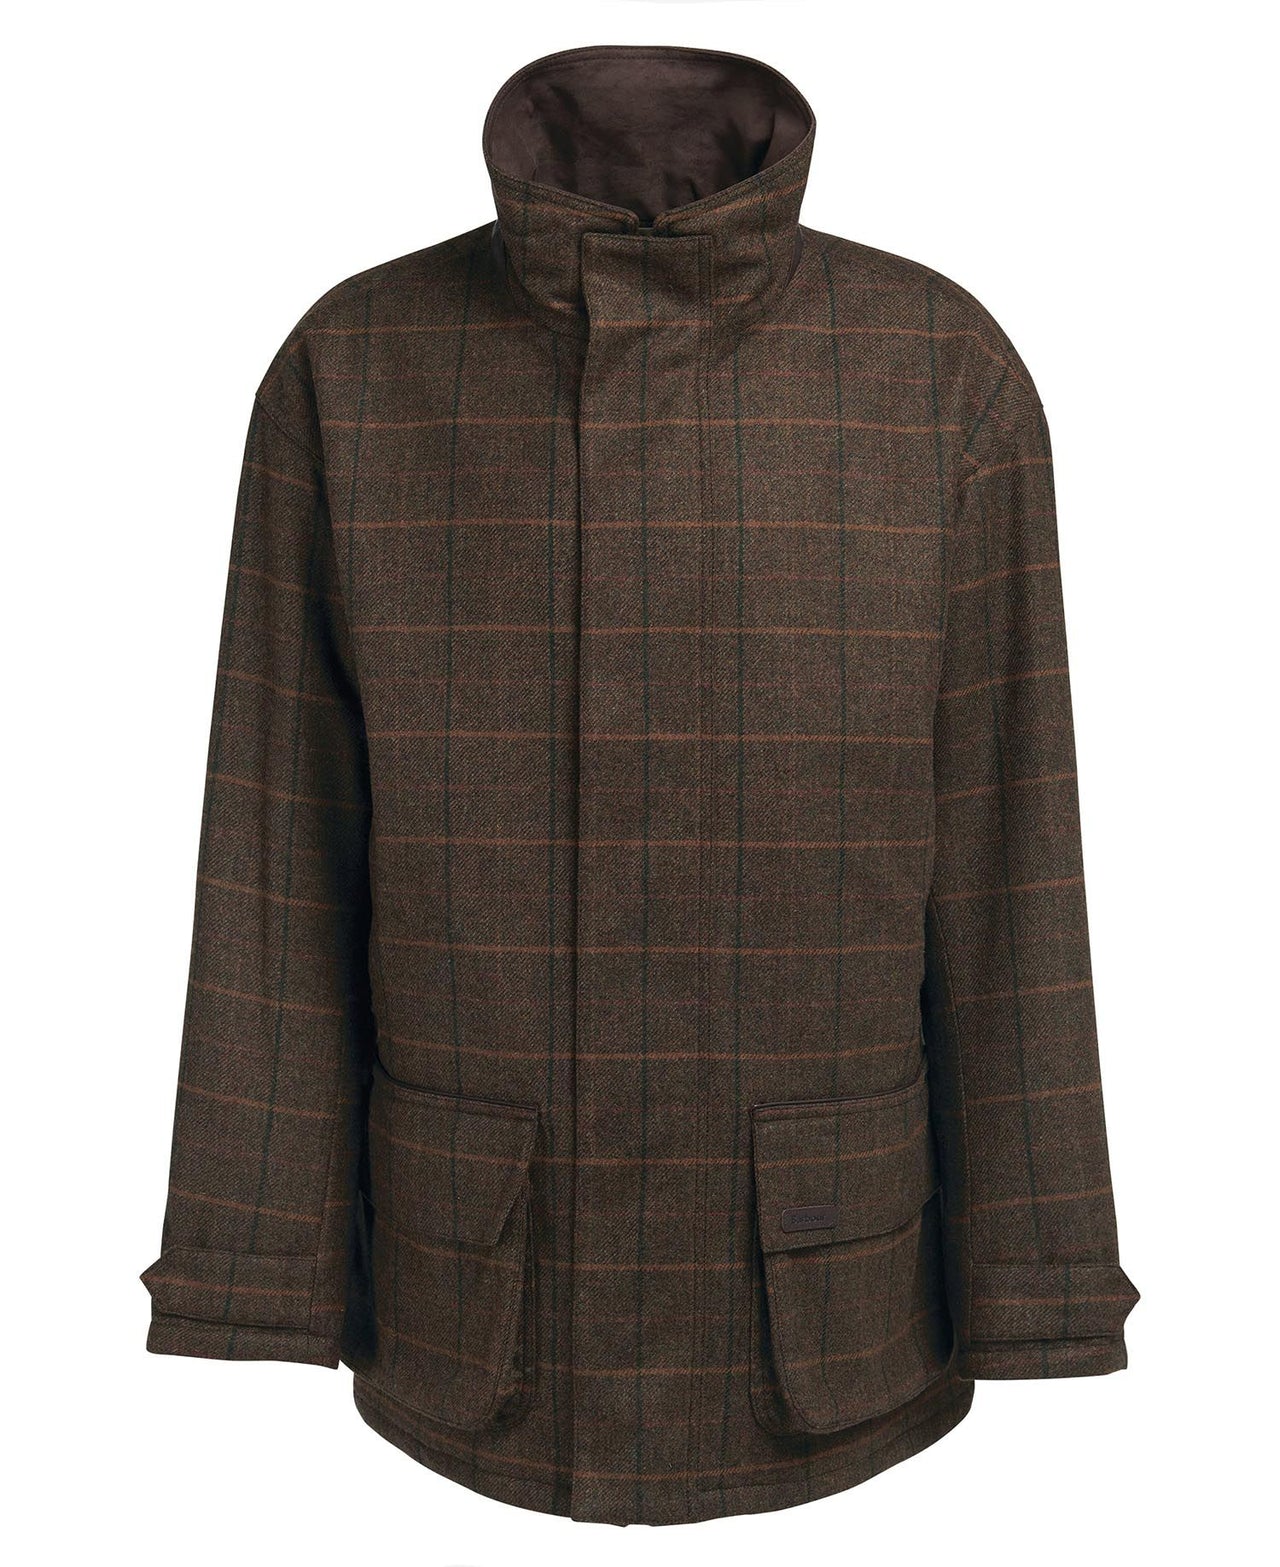 Barbour Beaconsfield Wool Jacket - Burnhill Brown Check